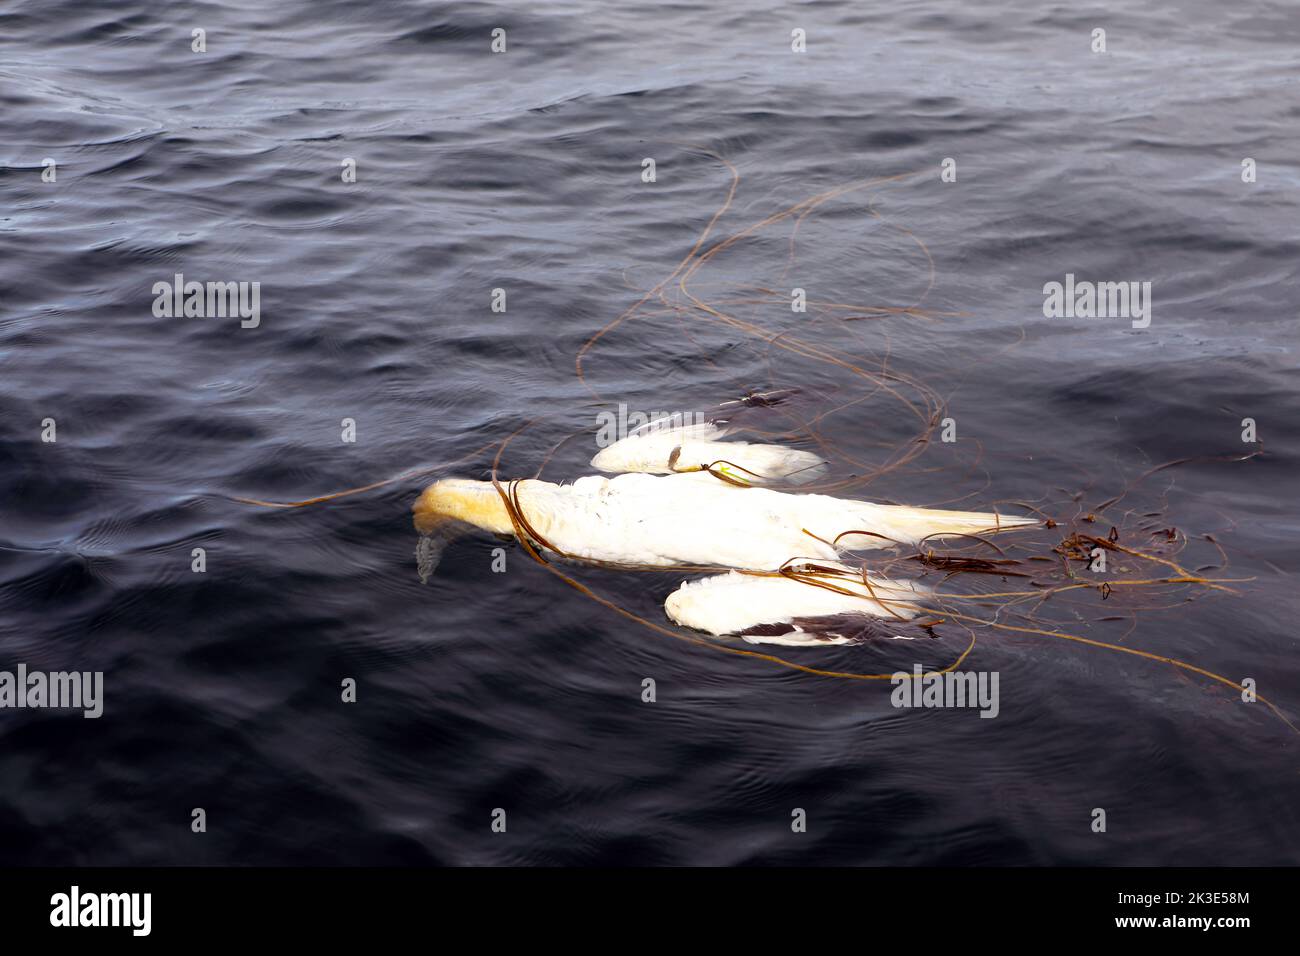 Dead gannet, a casualty of Avian flu or Bird Flu,  floating in the sea tangled in seaweed off the coast of the Isle of Mull, Scotland Stock Photo